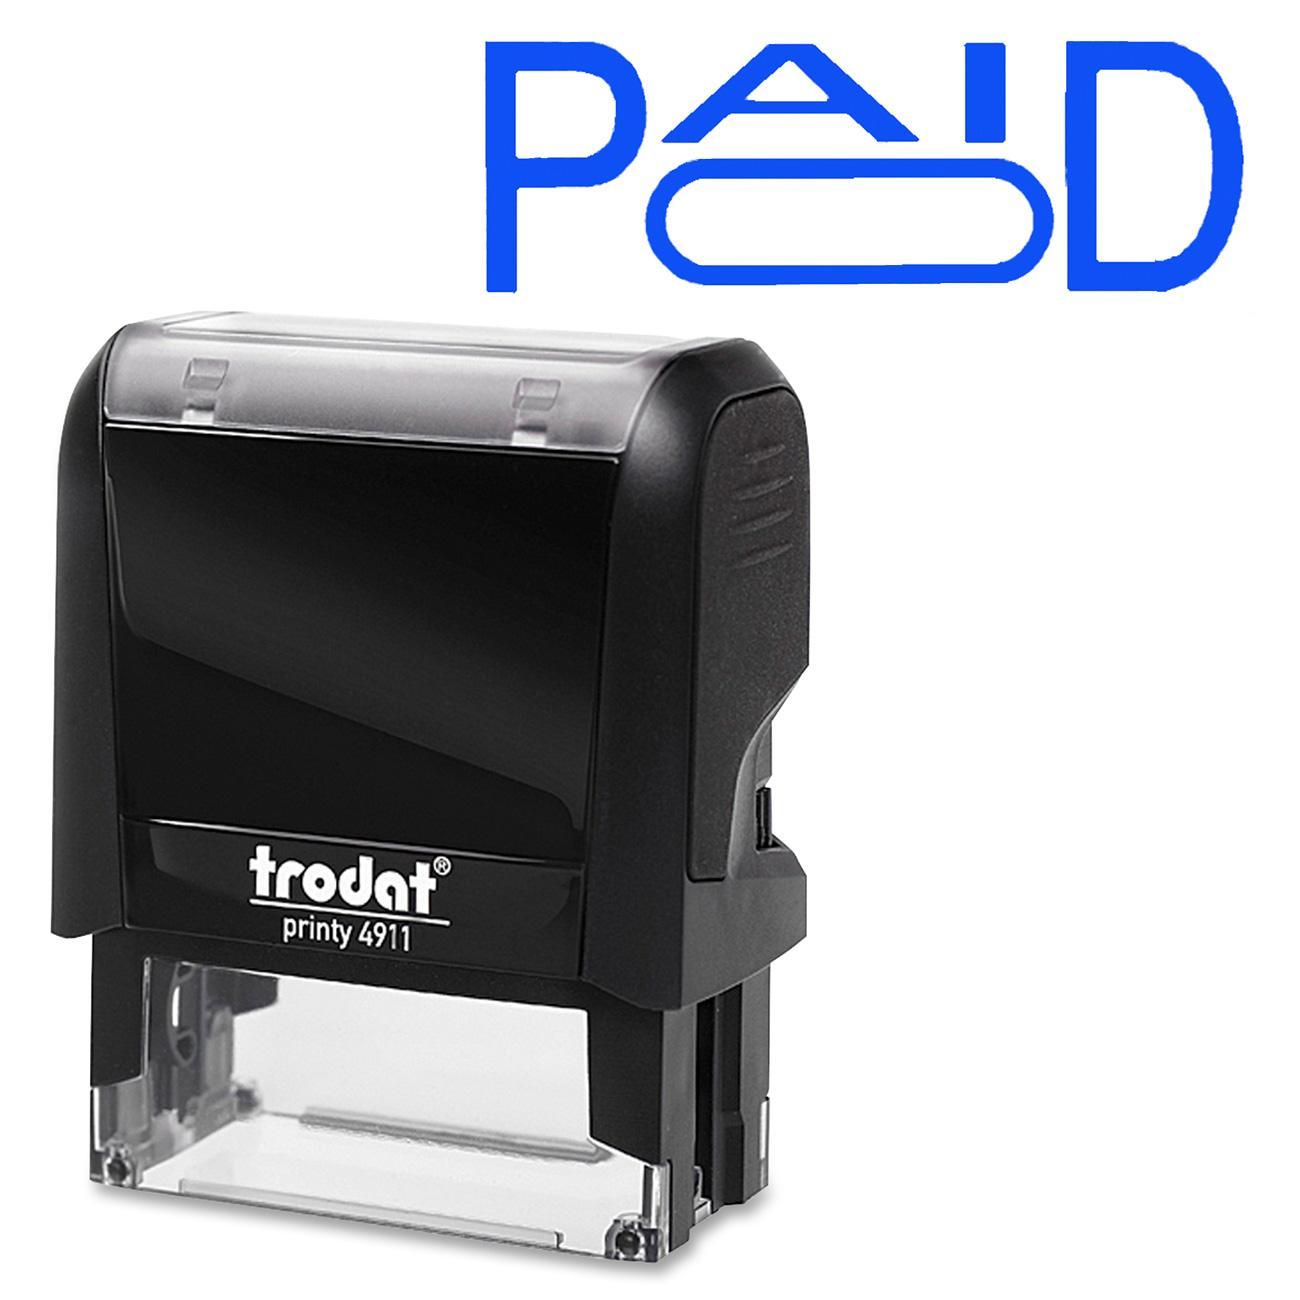 Trodat Self Inking ''PAID'' Stamp with text option - Each